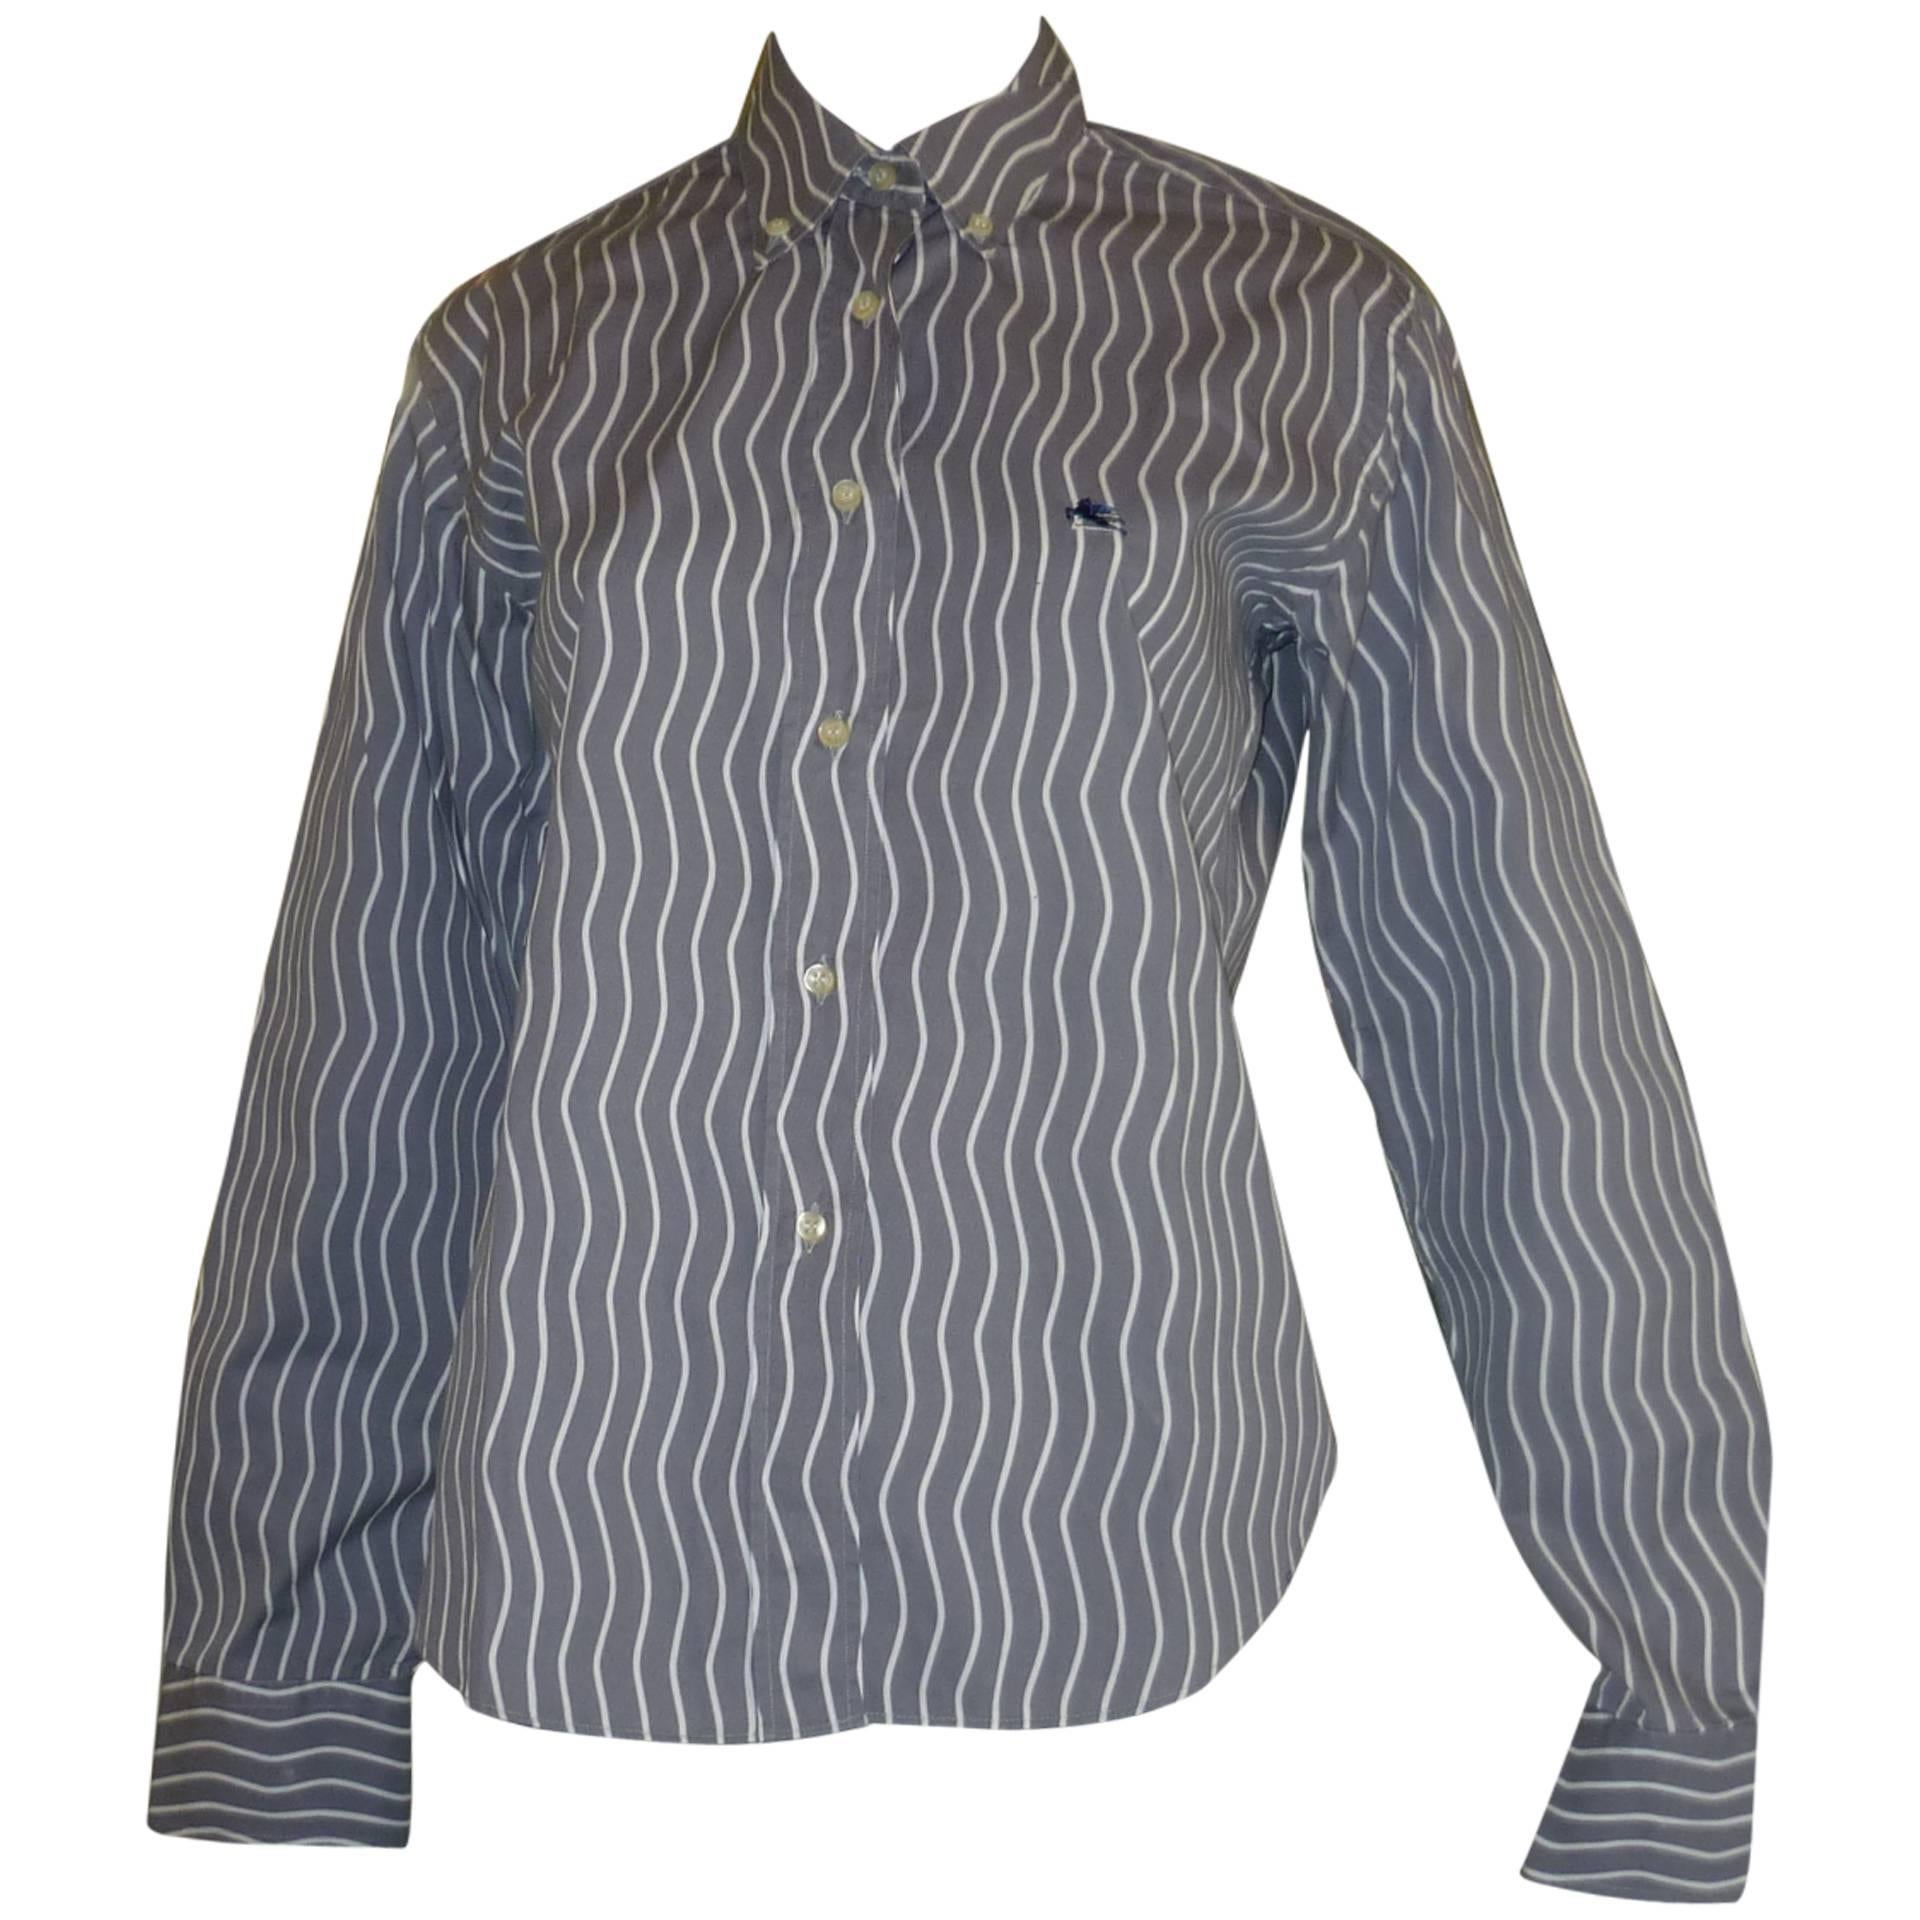 ETRO Grey and White "Wave" Button-Down Shirt (44 ITL)